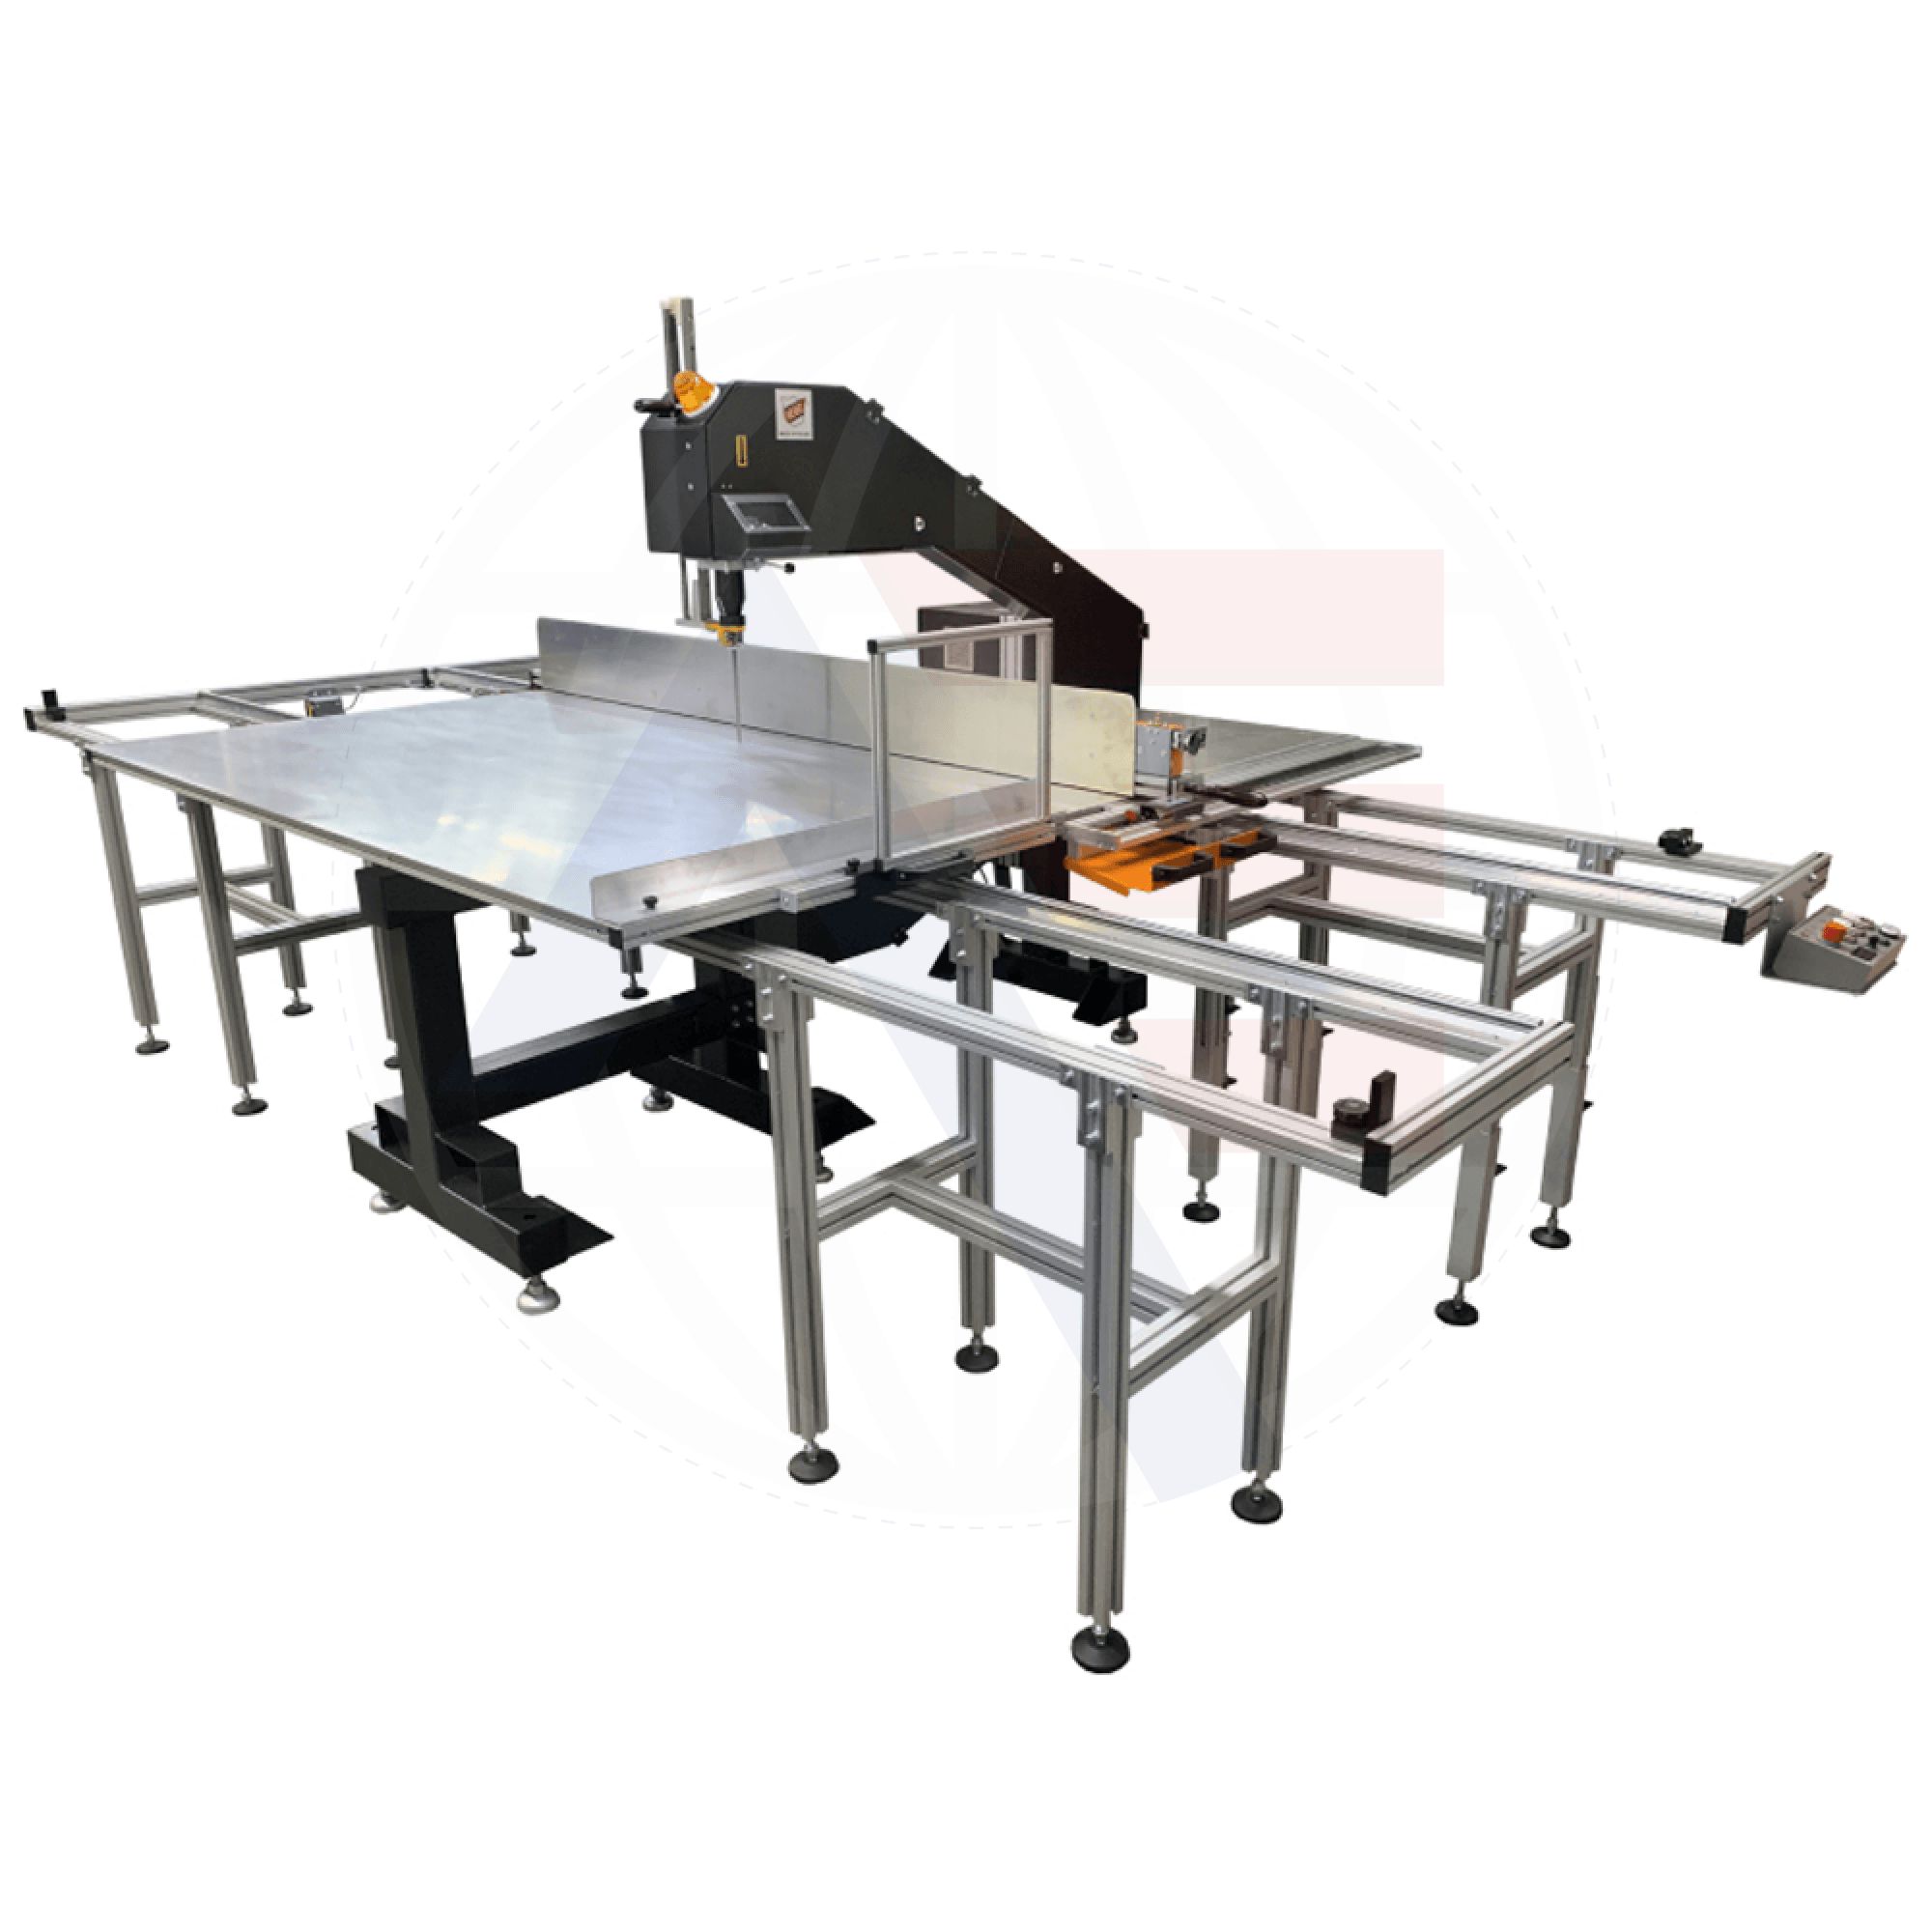 Rexel R1000/Pb Band Knife Cutting Machine With Sliding Table Machines